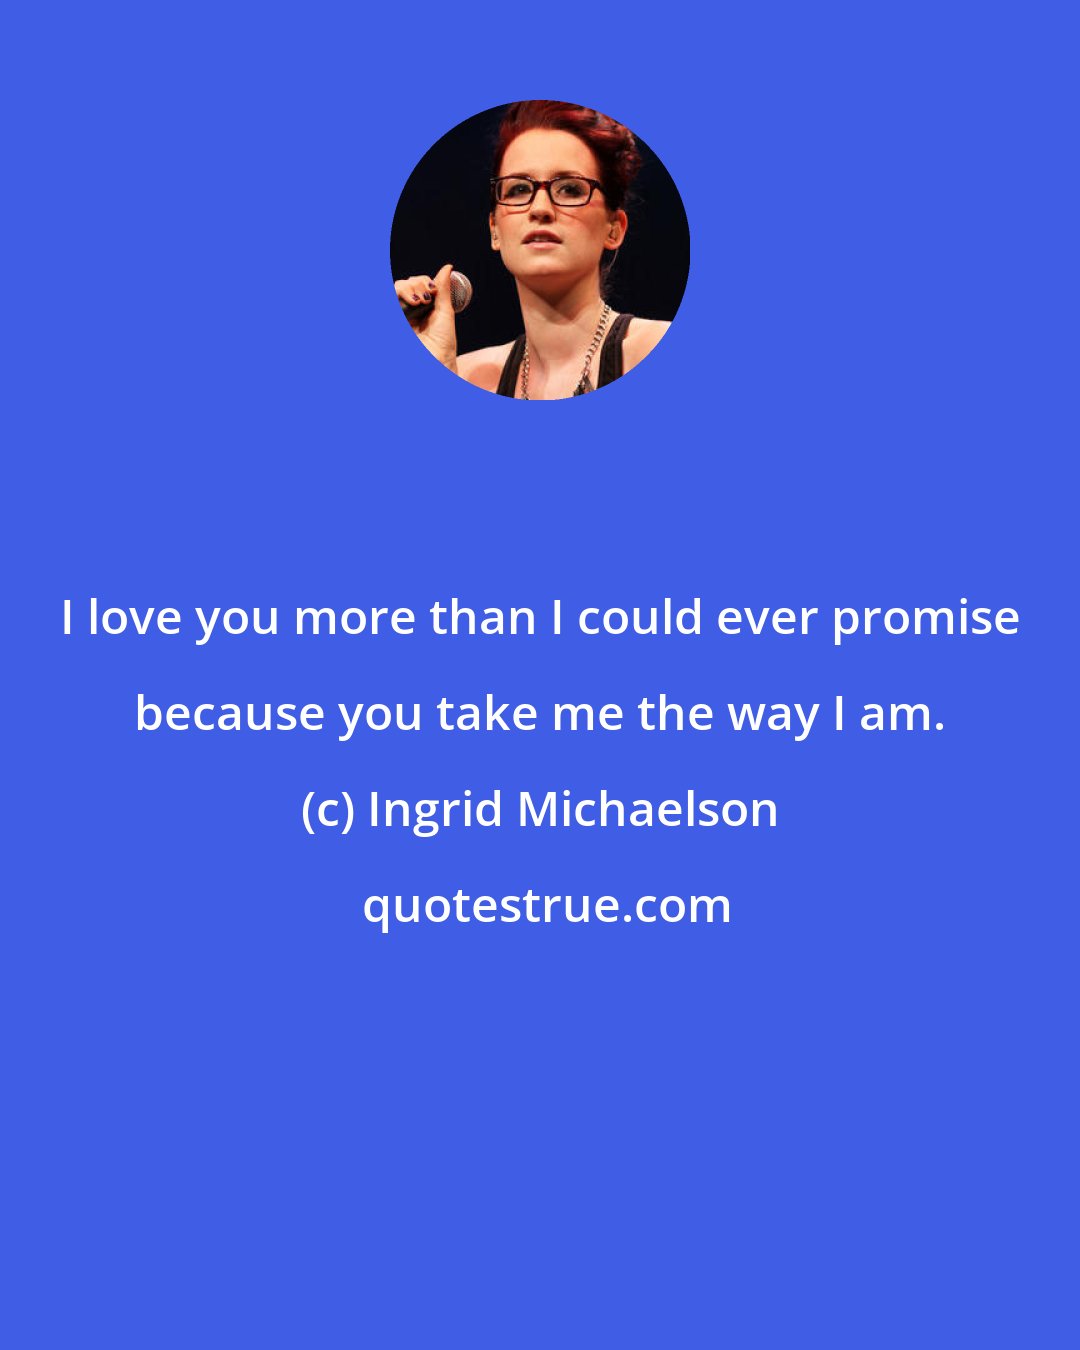 Ingrid Michaelson: I love you more than I could ever promise because you take me the way I am.